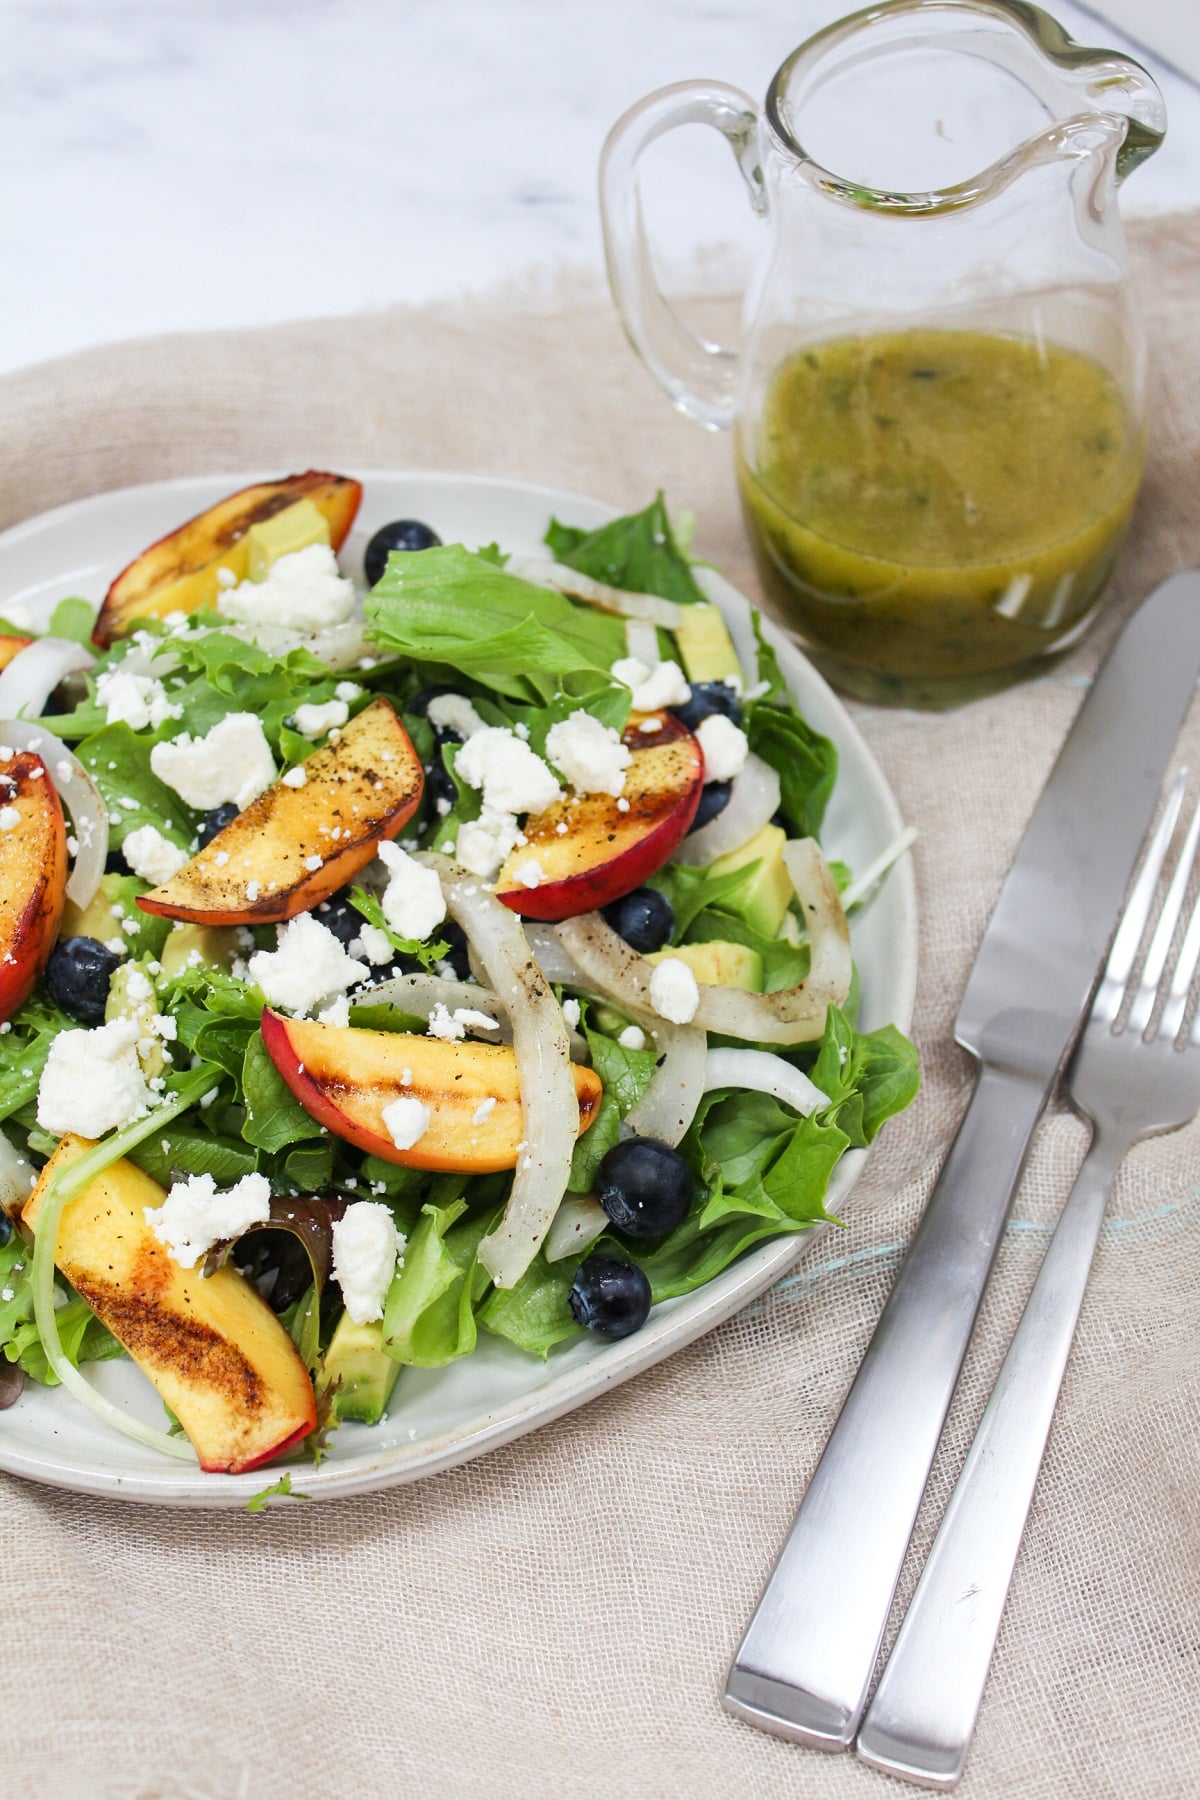 Lettuce topped with siced onions, grilled peaches, blueberries, and feta. There is a bowl of dressing and a fork on the side.